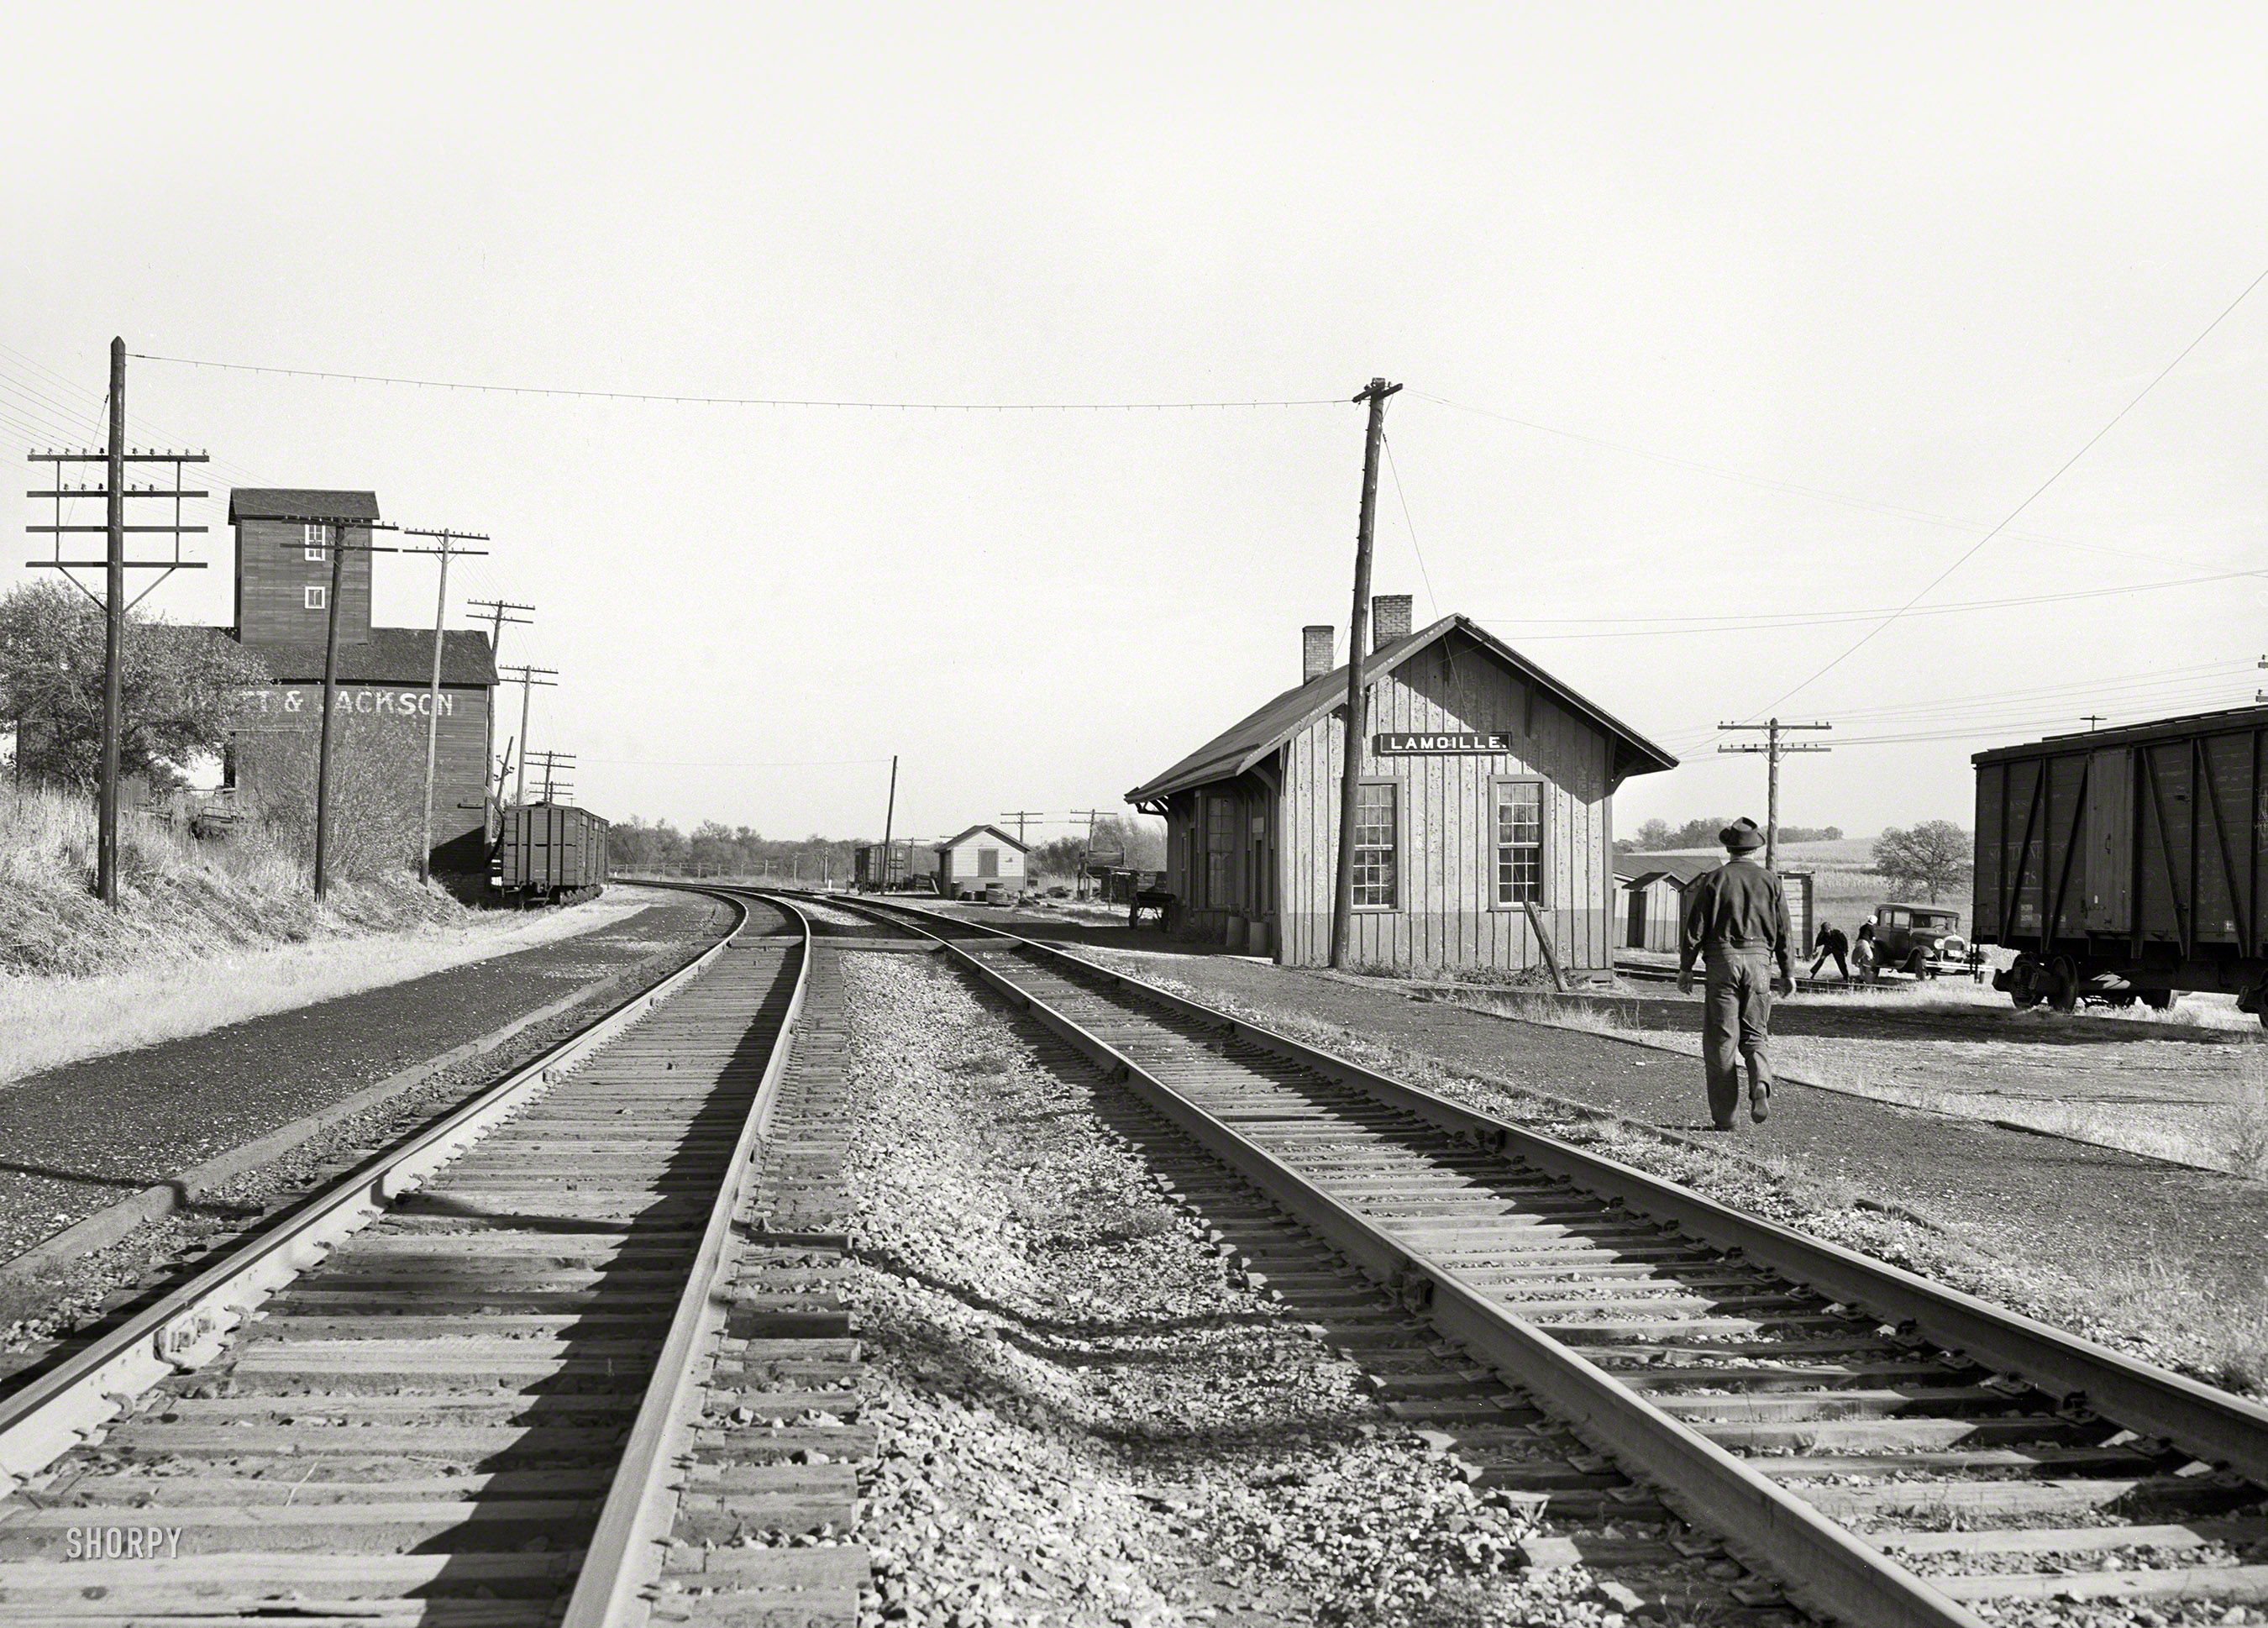 October 1939. "Railroad station. Lamoille, Iowa." Medium format negative by Arthur Rothstein for the Farm Security Administration. View full size.